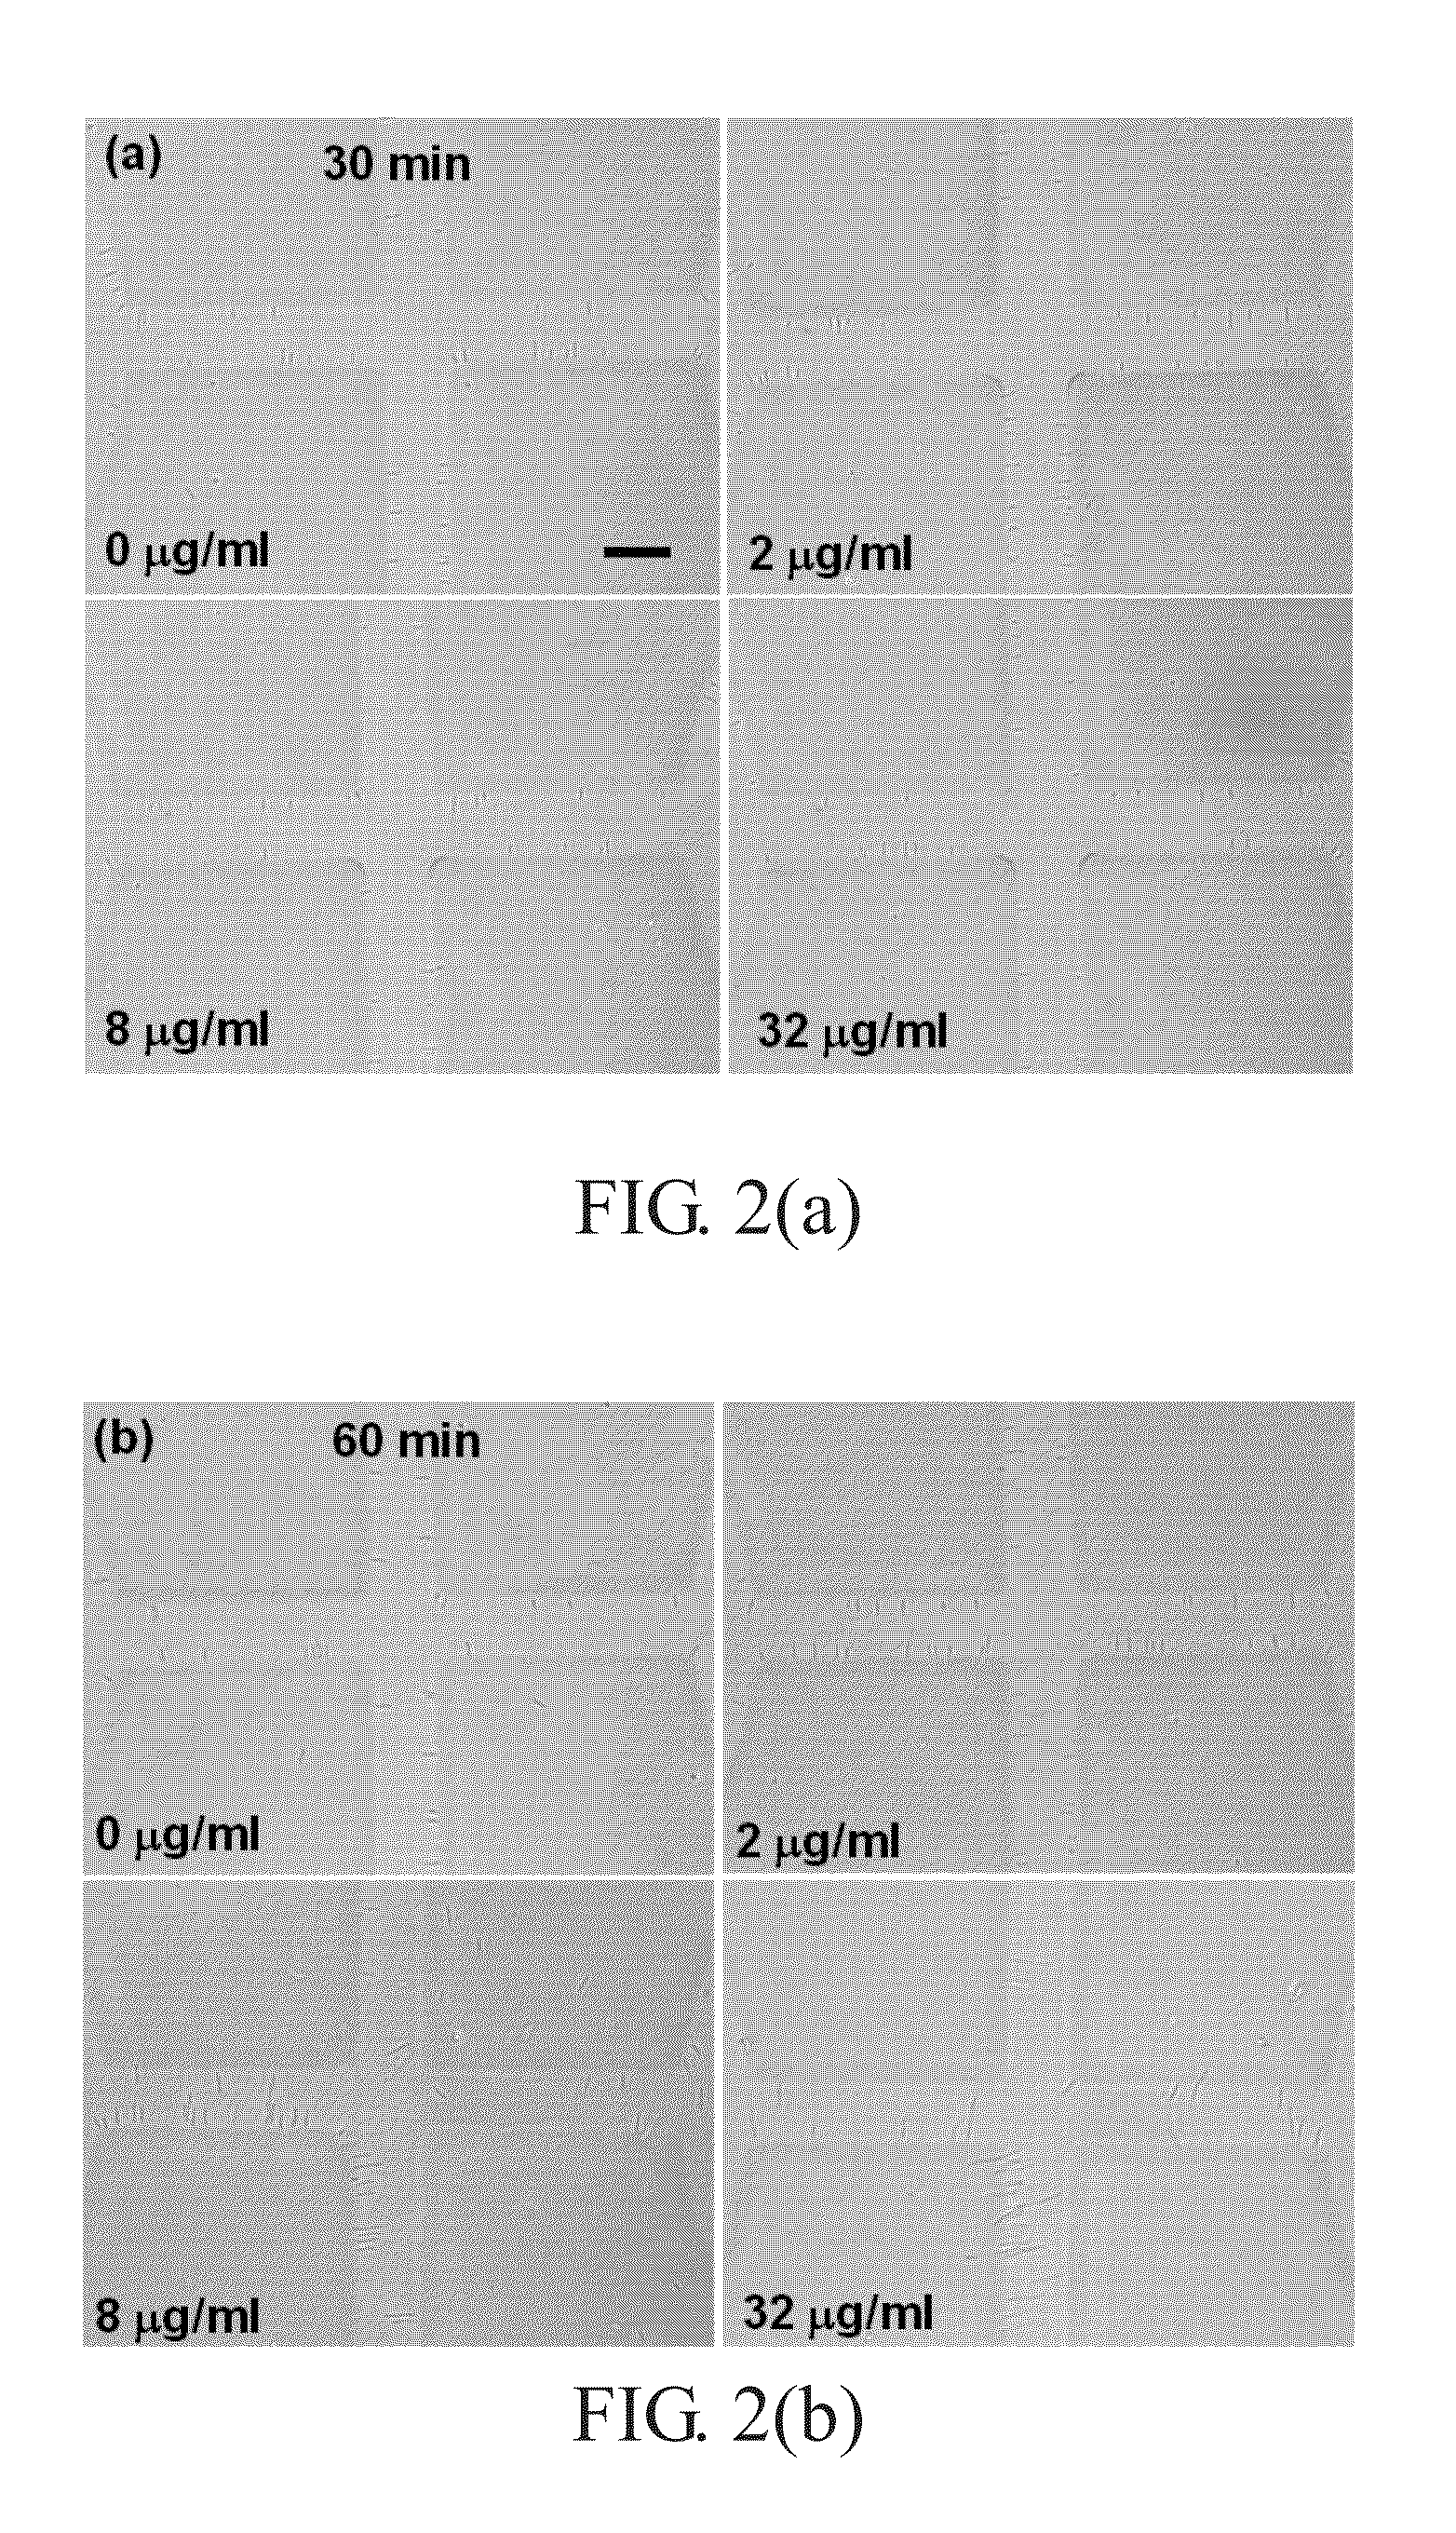 Method for antibiotic susceptibility testing and determining minimum inhibitory concentration of the antibiotic